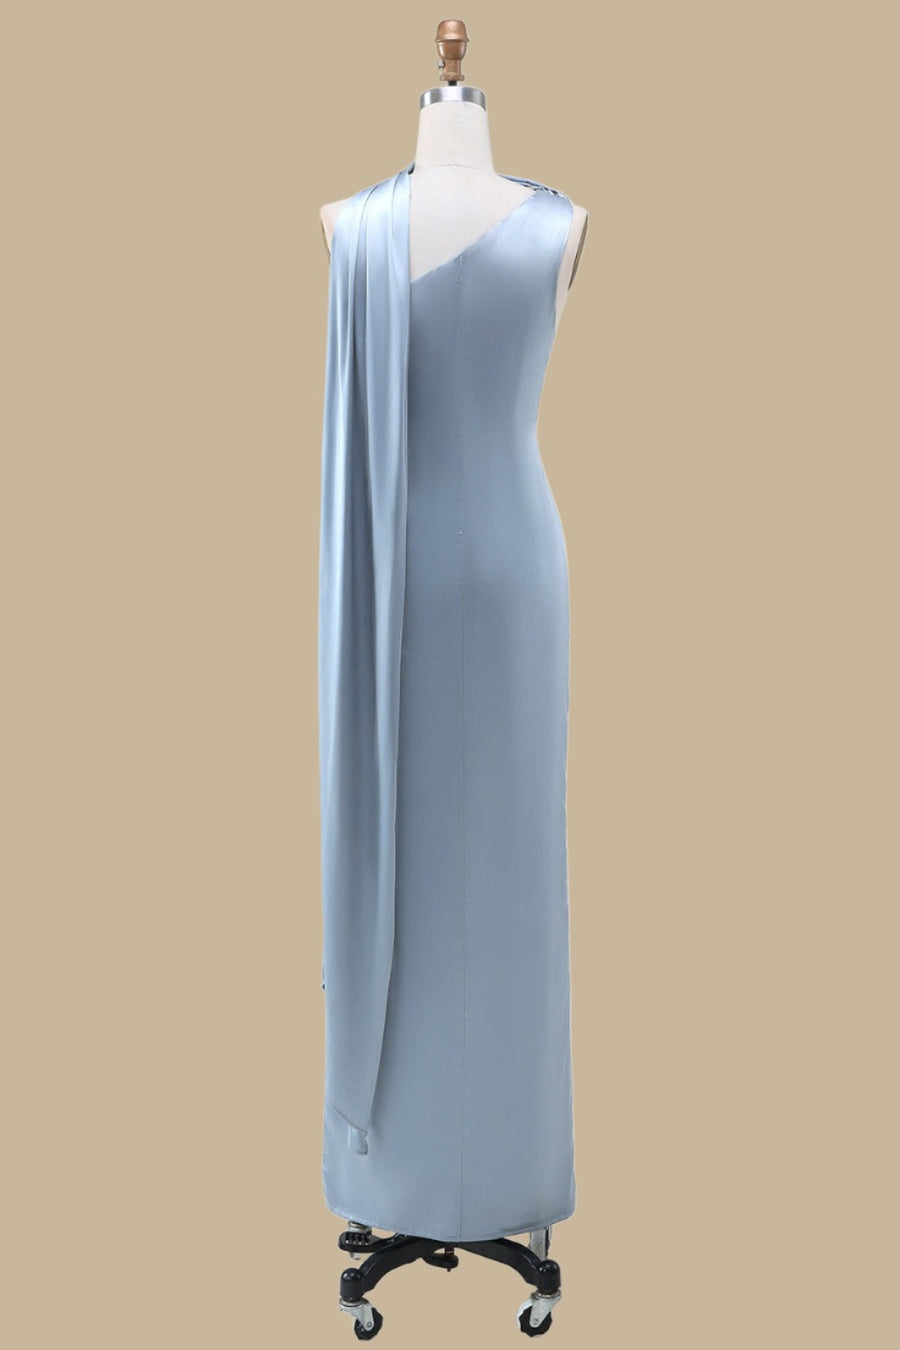 One-Shoulder Maxi Dress with Sash in dusty blue